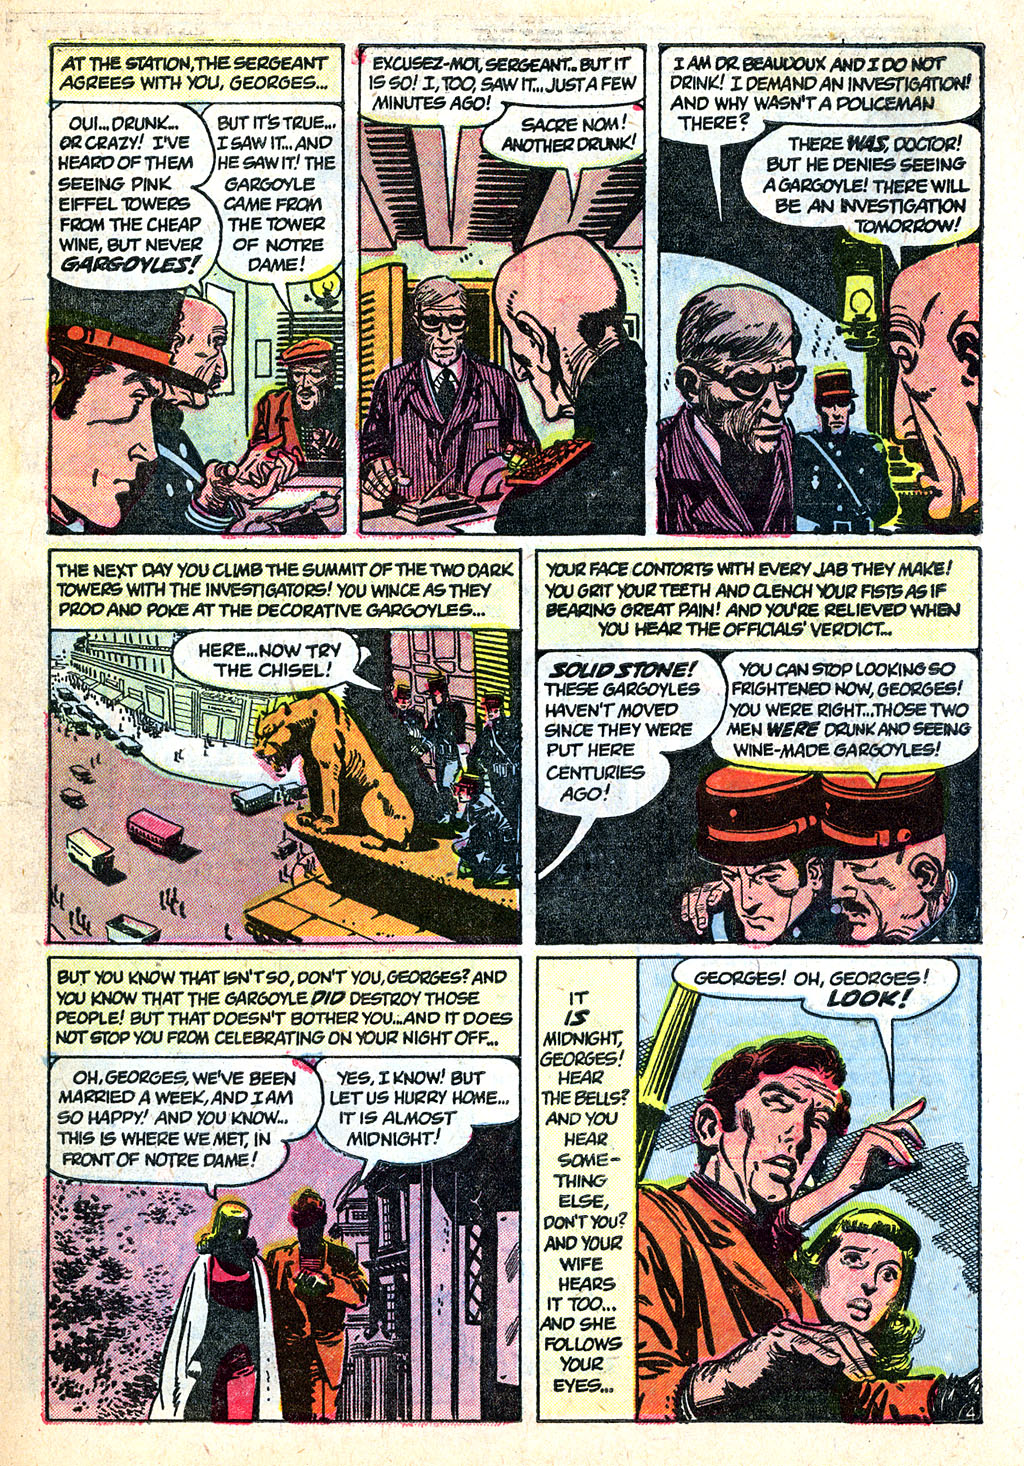 Marvel Tales (1949) 127 Page 30